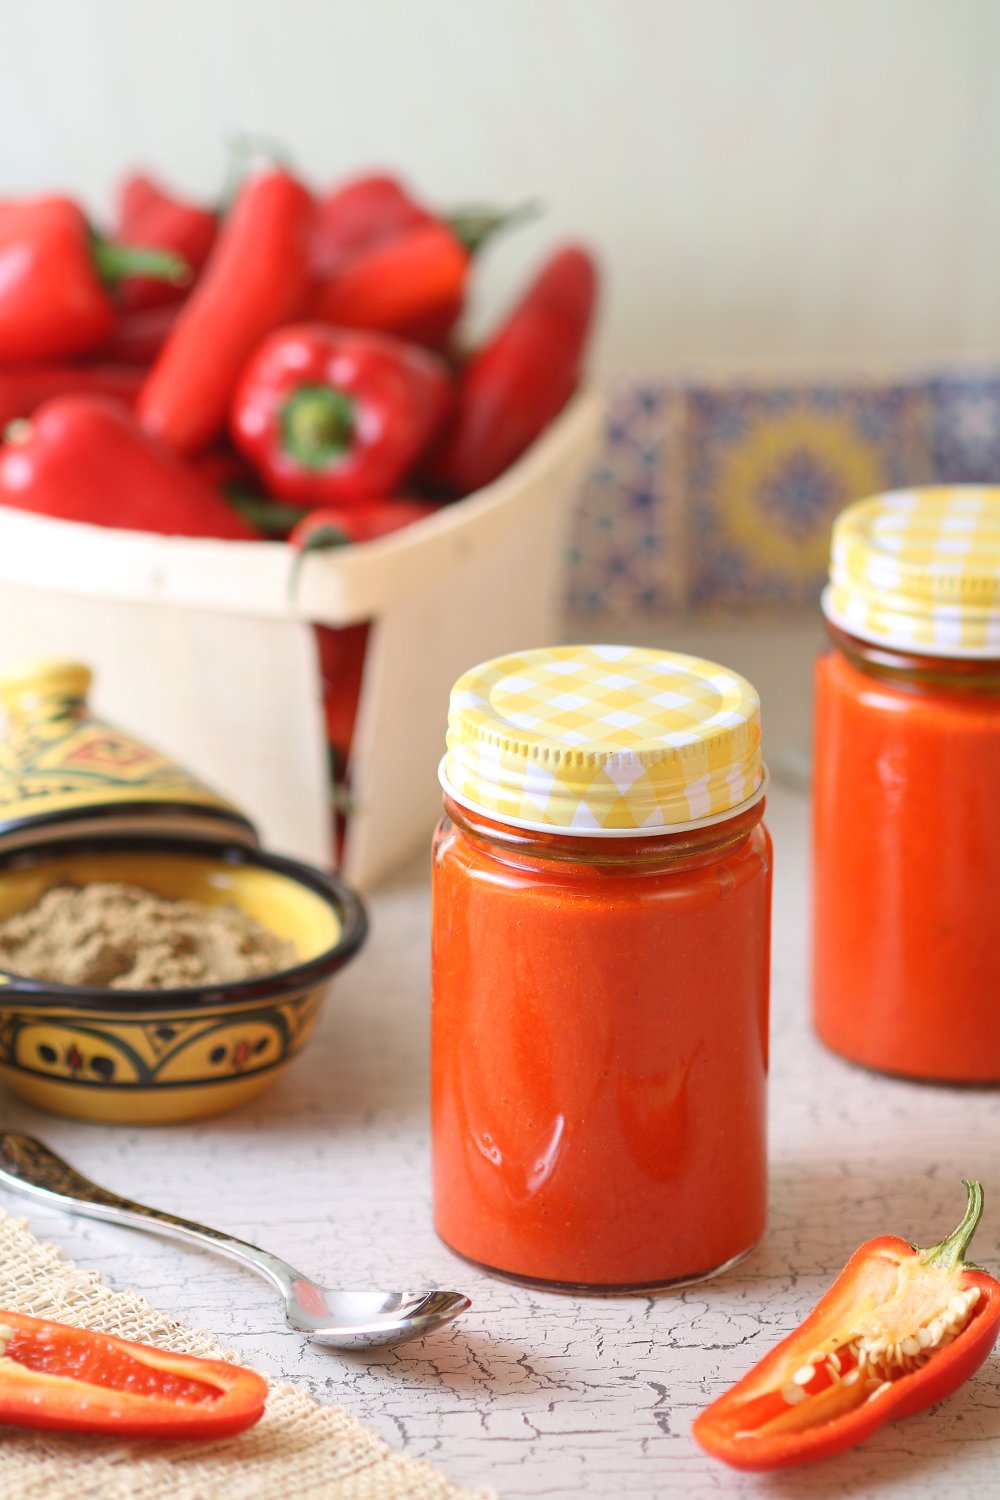 A simple recipe for tasty Homemade Tunisian Harissa paste that you can make as spicy or as mild as you want.